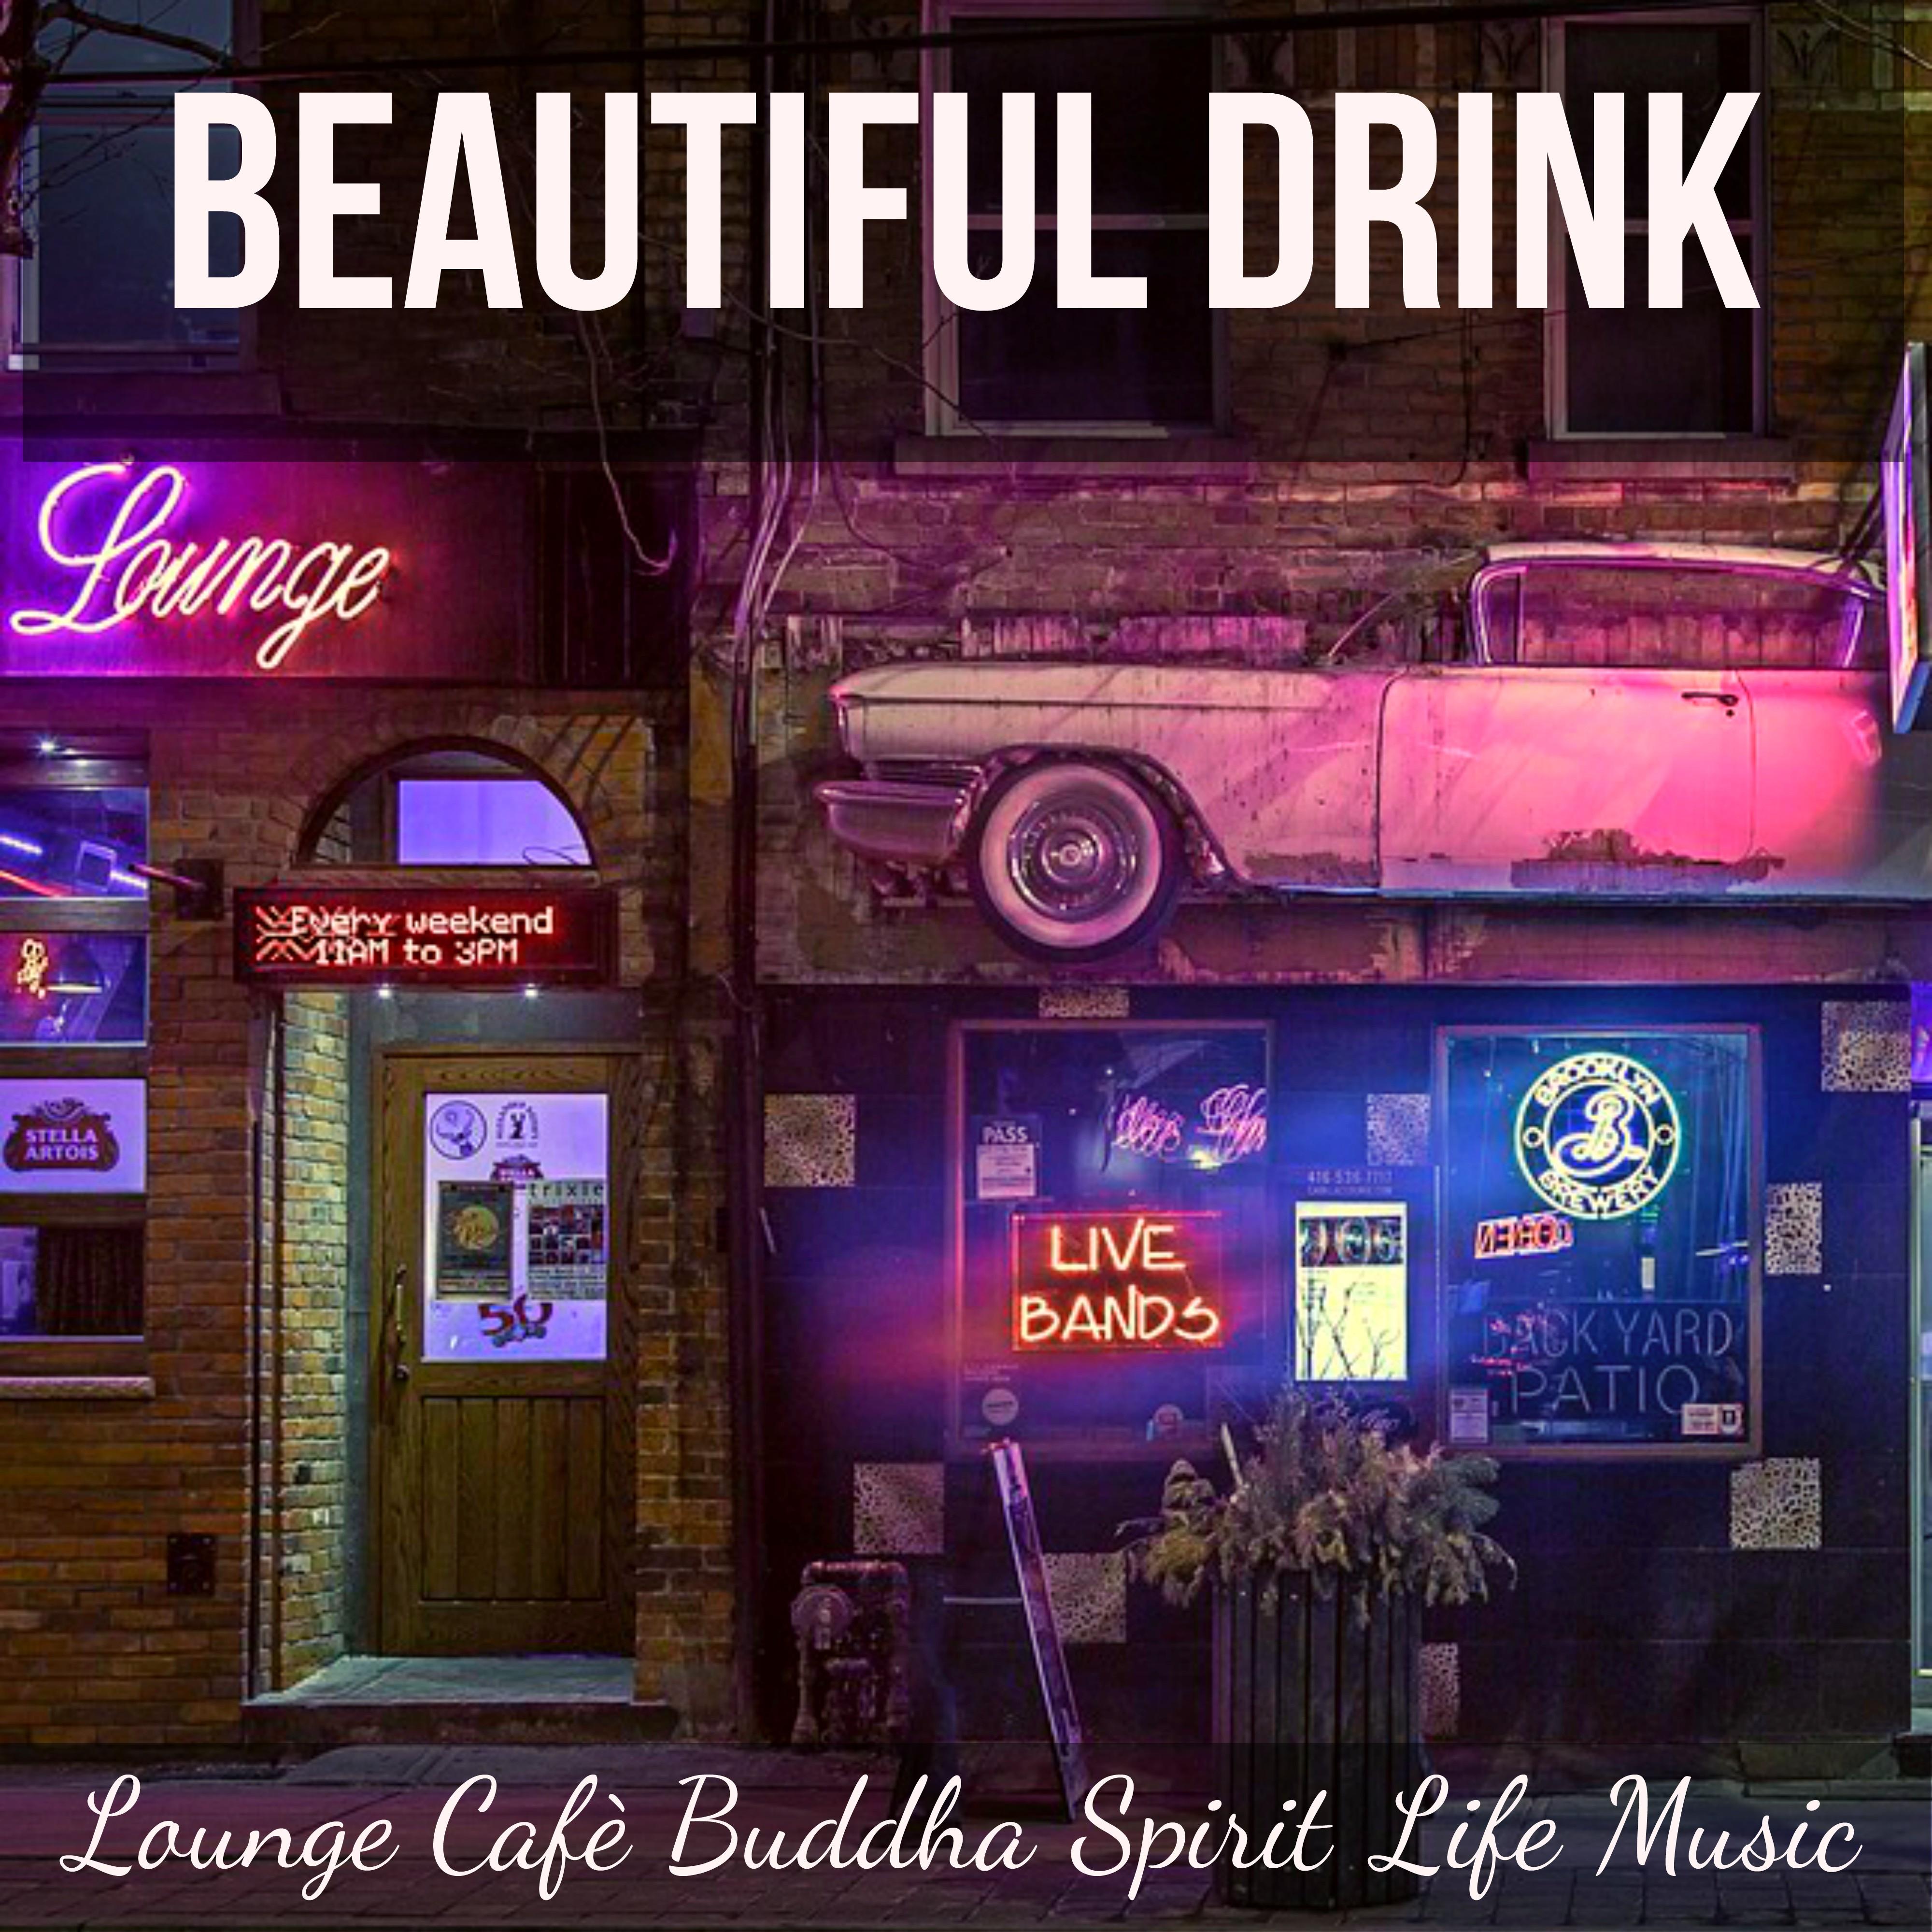 Beautiful Drink - Lounge Cafè Buddha Spirit Life Music for Healthy Times Easy Fitness Happy Cycle with Electro Chillout House Sounds